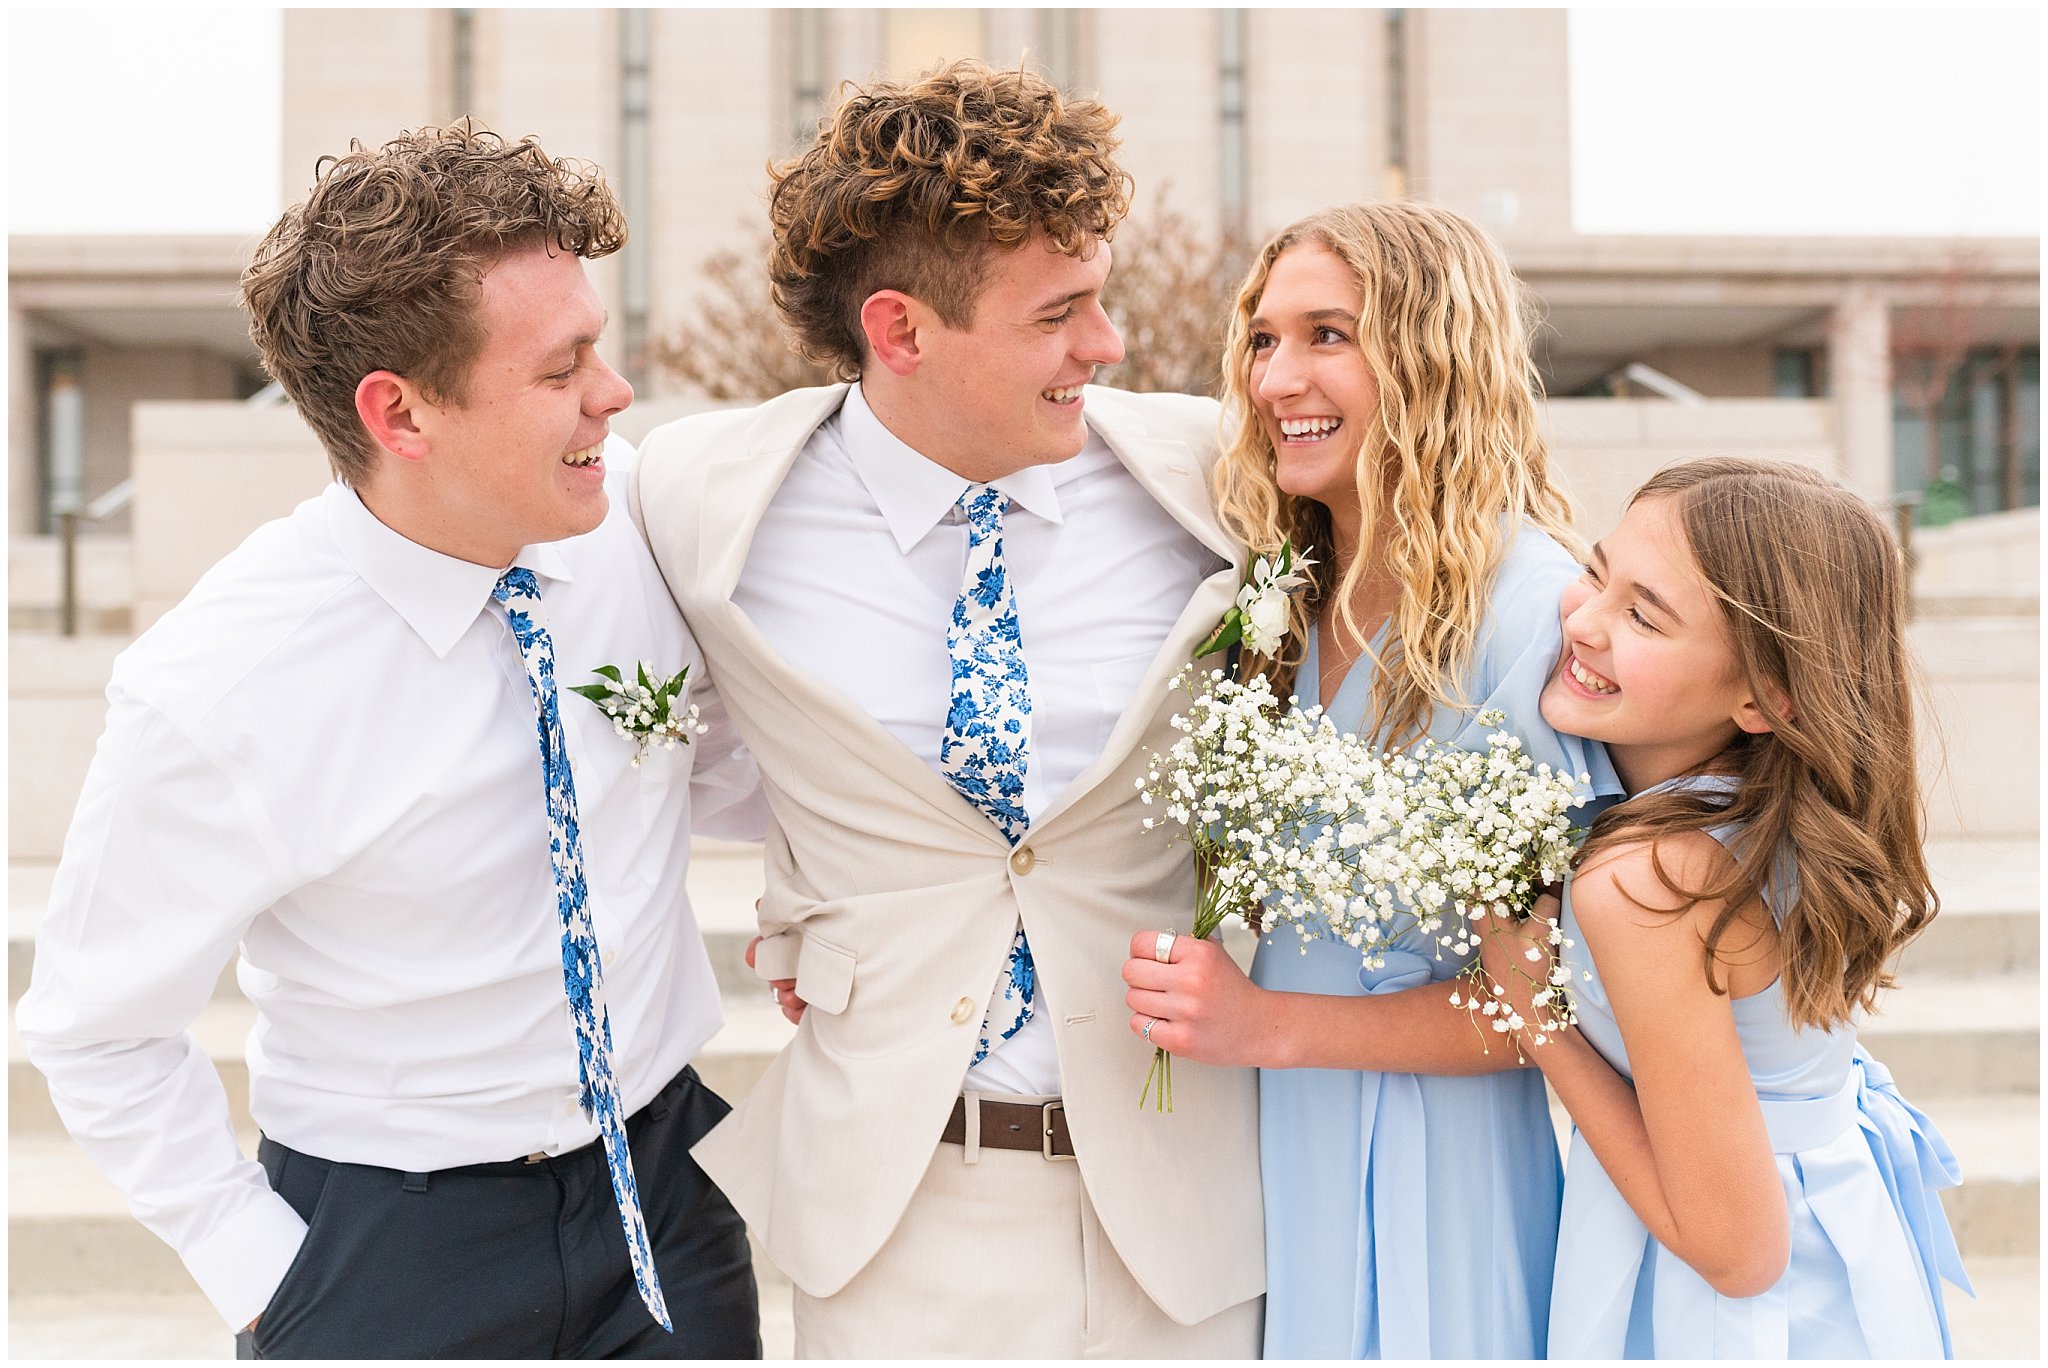 Family formal photos at the temple | Oquirrh Mountain Temple and Draper Day Barn Winter Wedding | Jessie and Dallin Photography